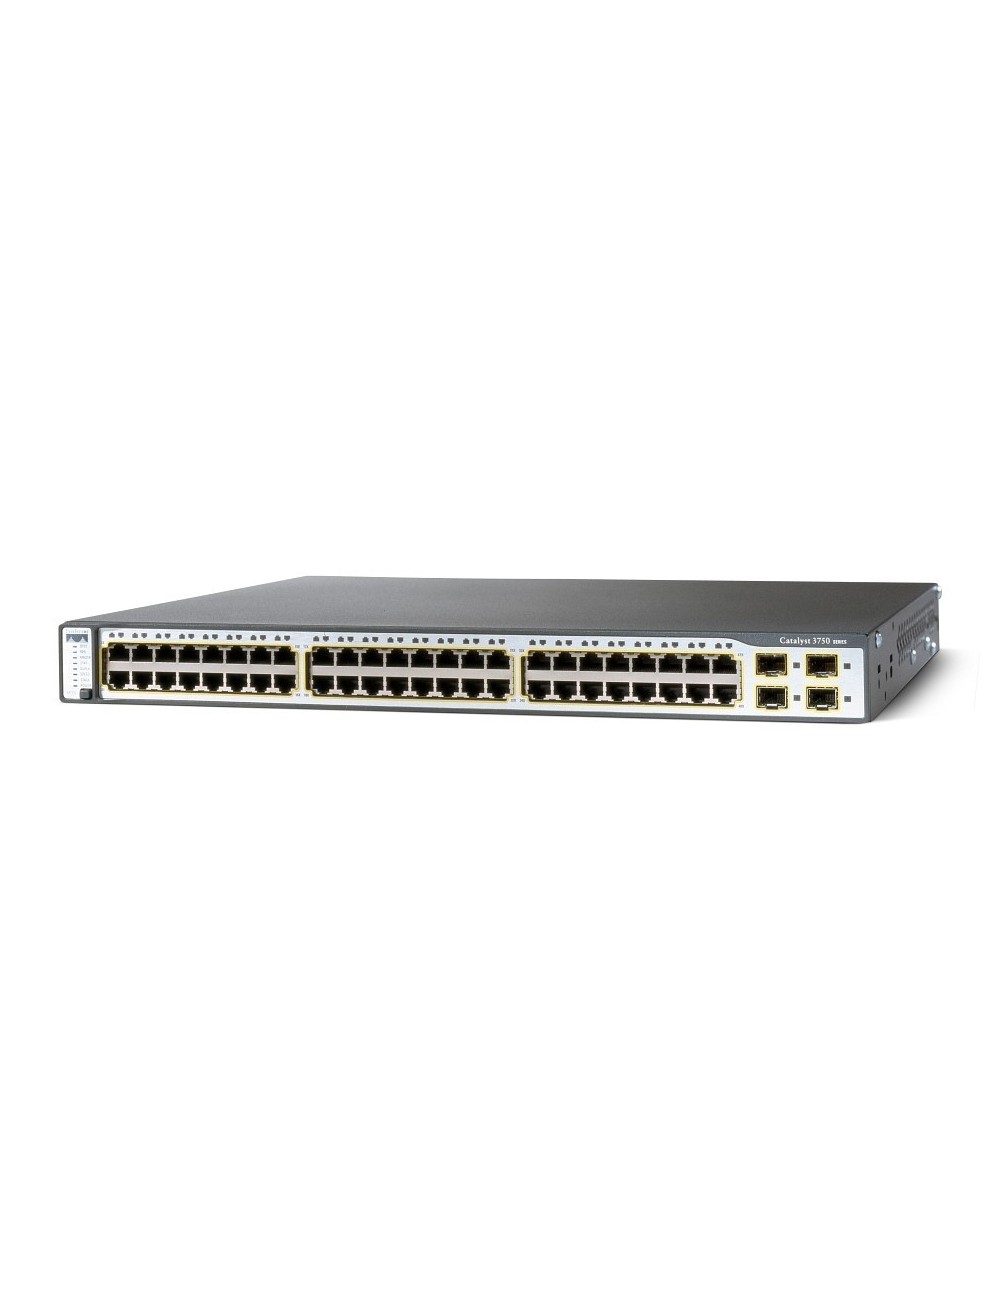 WS-C3750G-48PS-​S Cisco managed gigabit stackable PoE switch